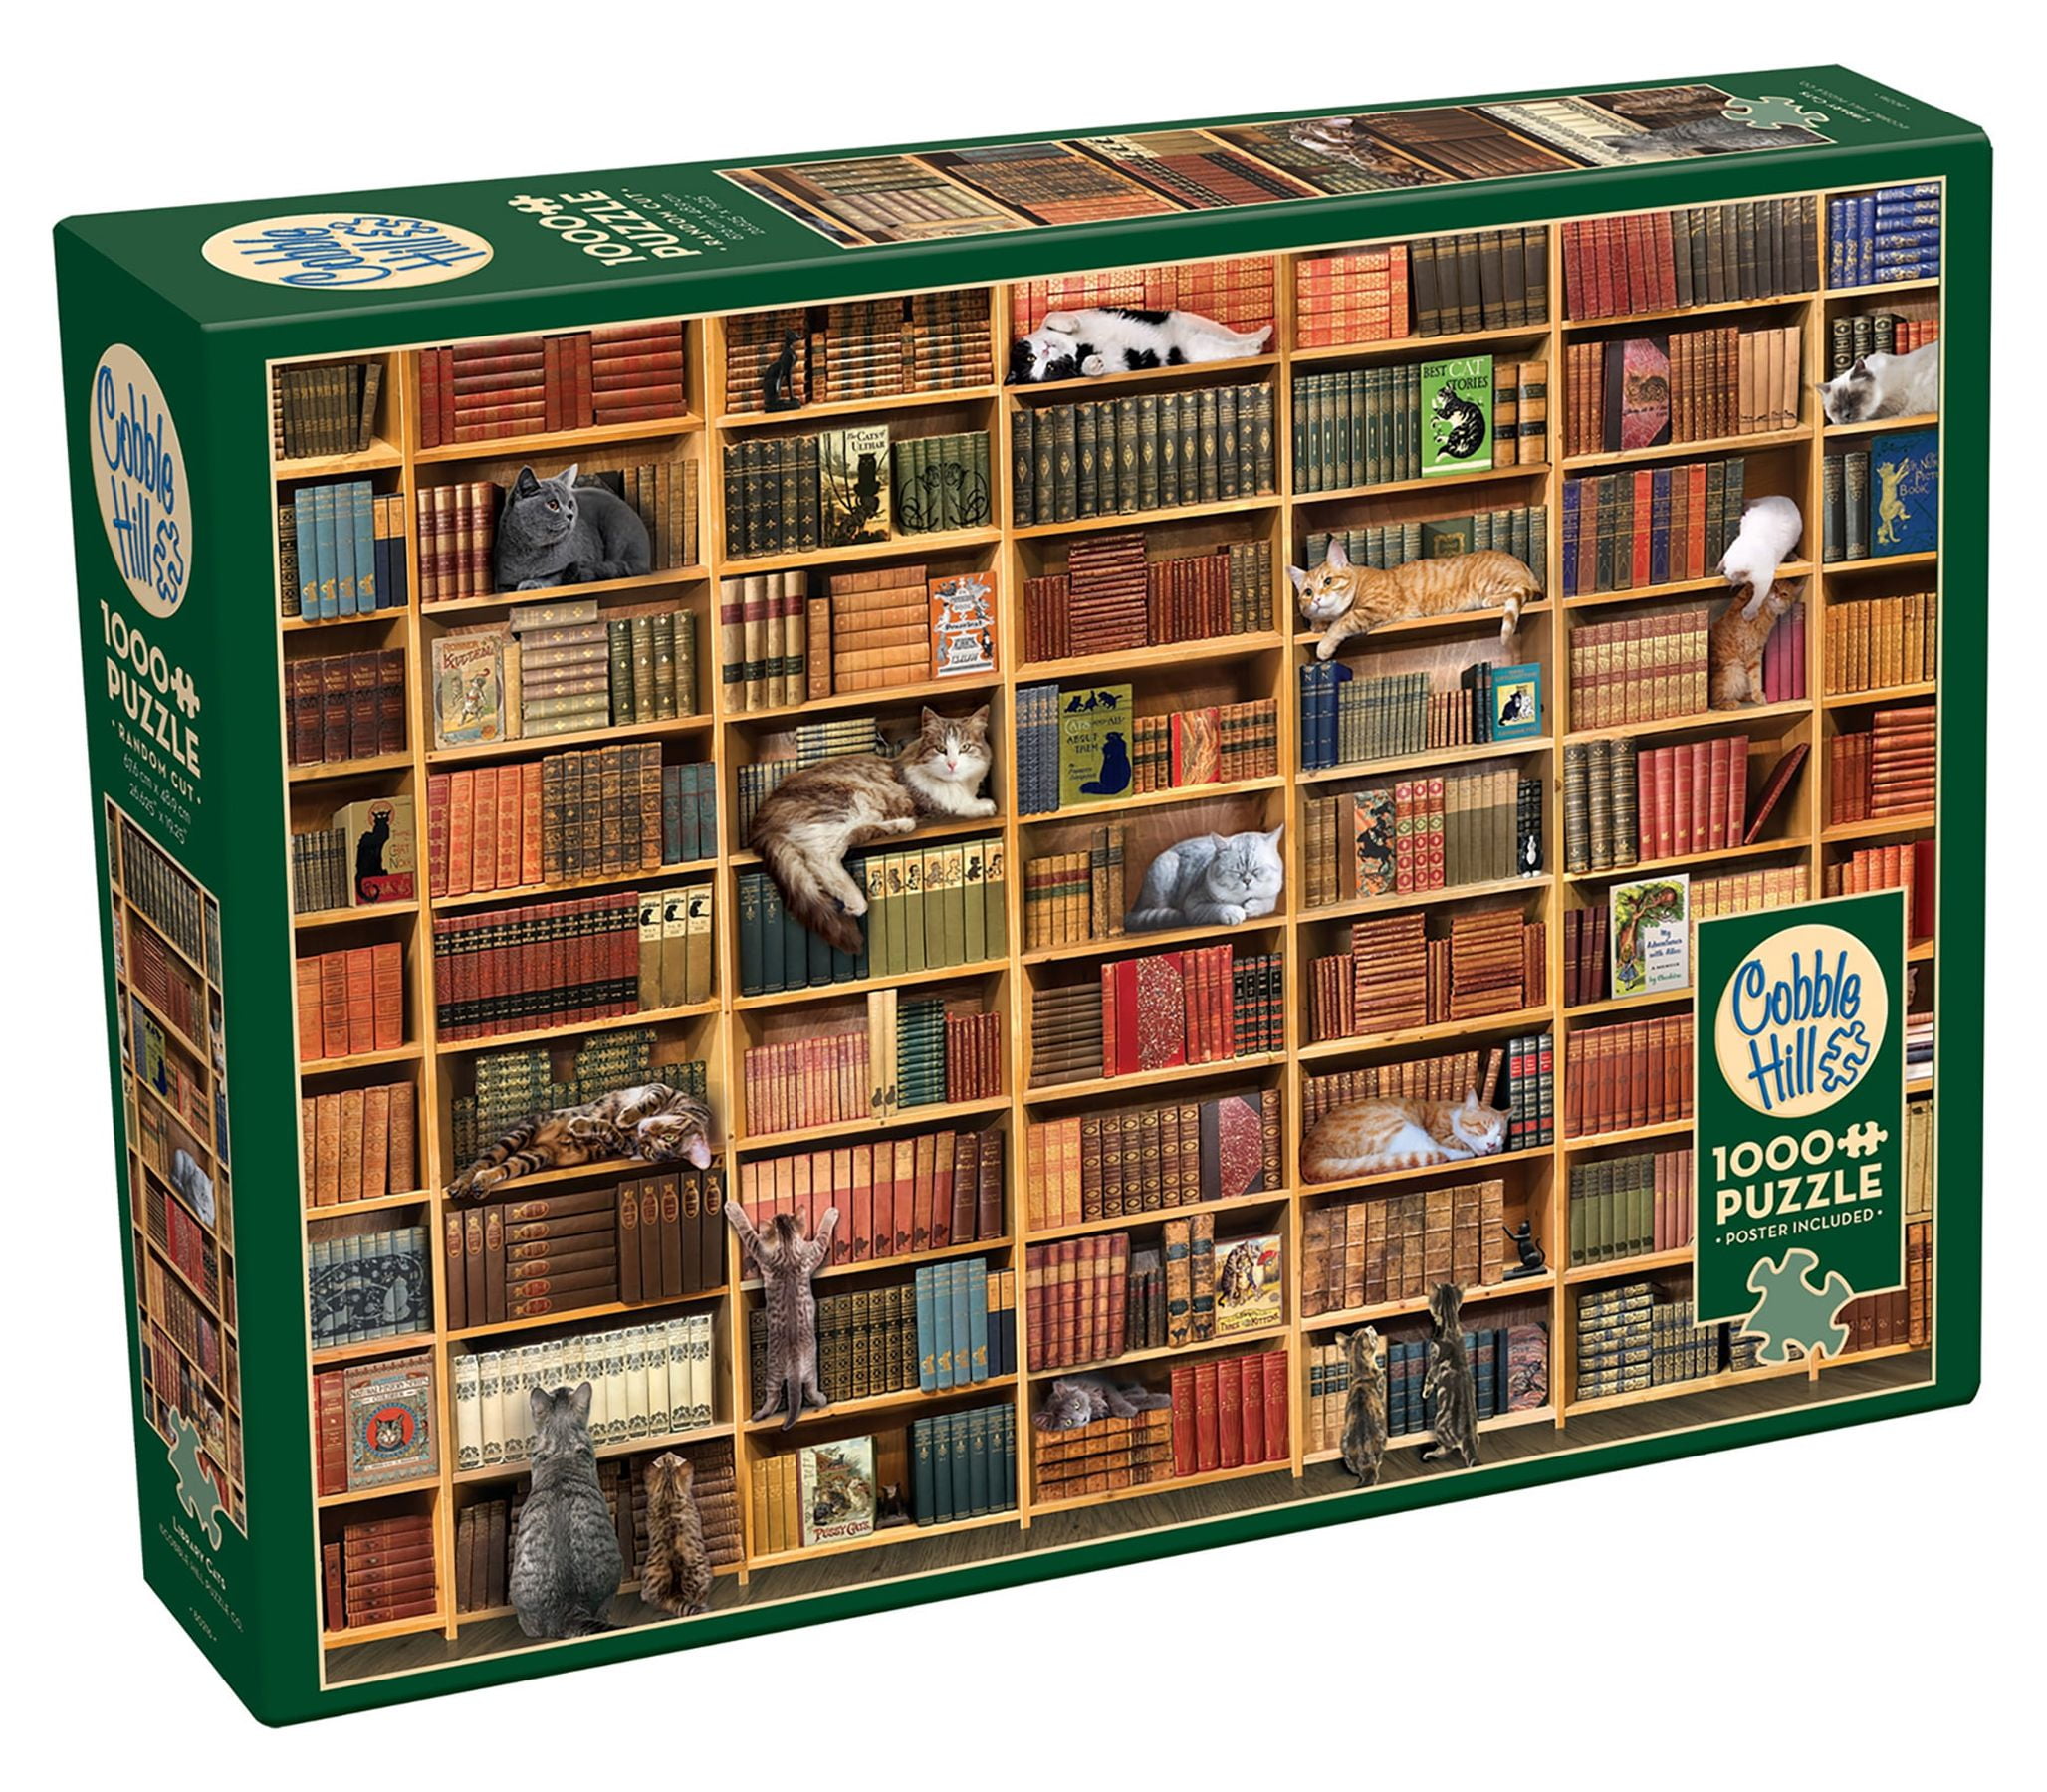 The Library Jigsaw Puzzle